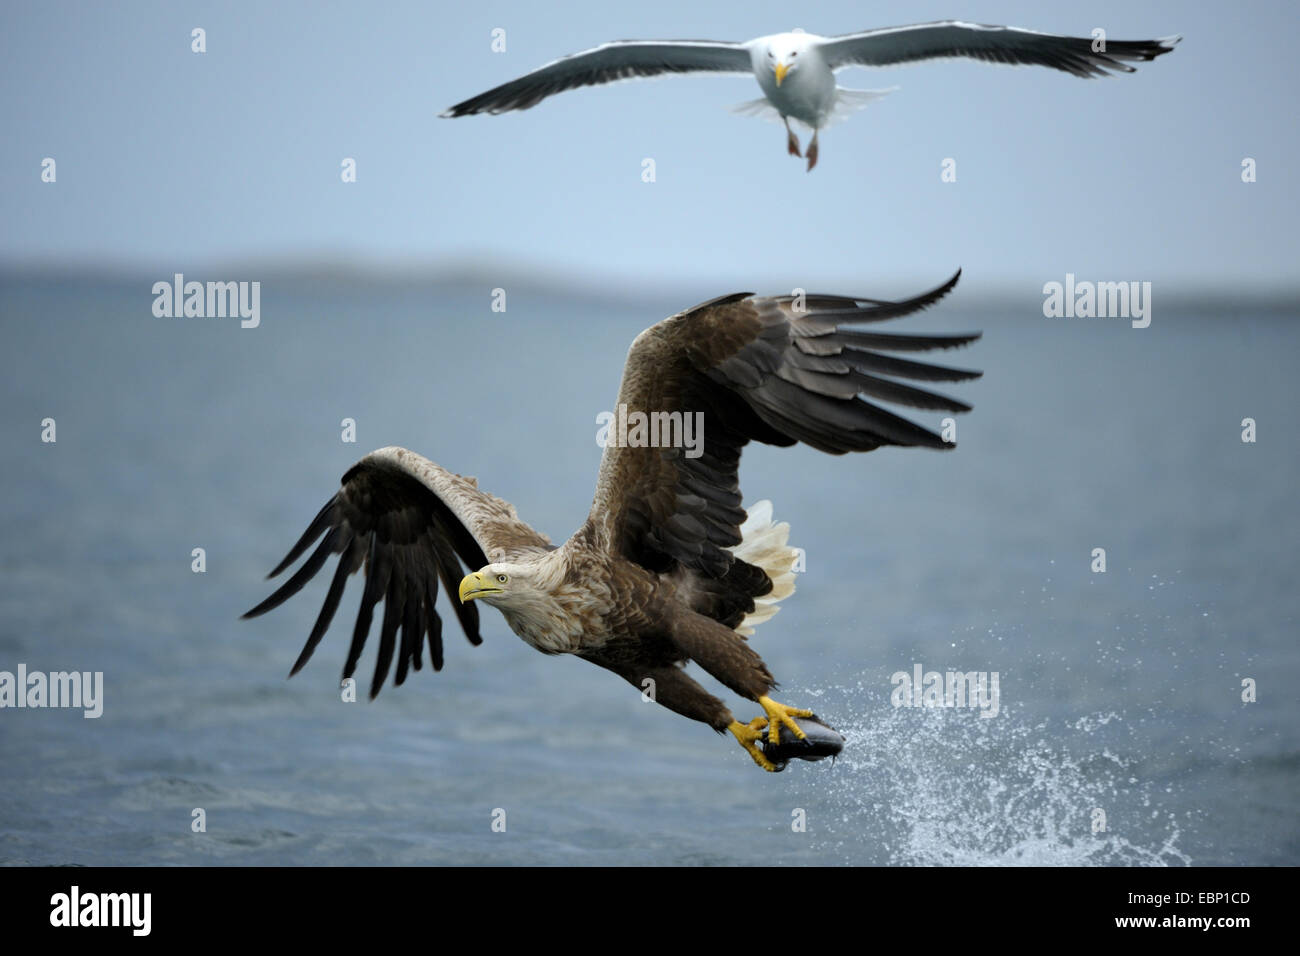 white-tailed sea eagle (Haliaeetus albicilla), flying with prey, beset by a Great Black-backed Gull, Norway Stock Photo